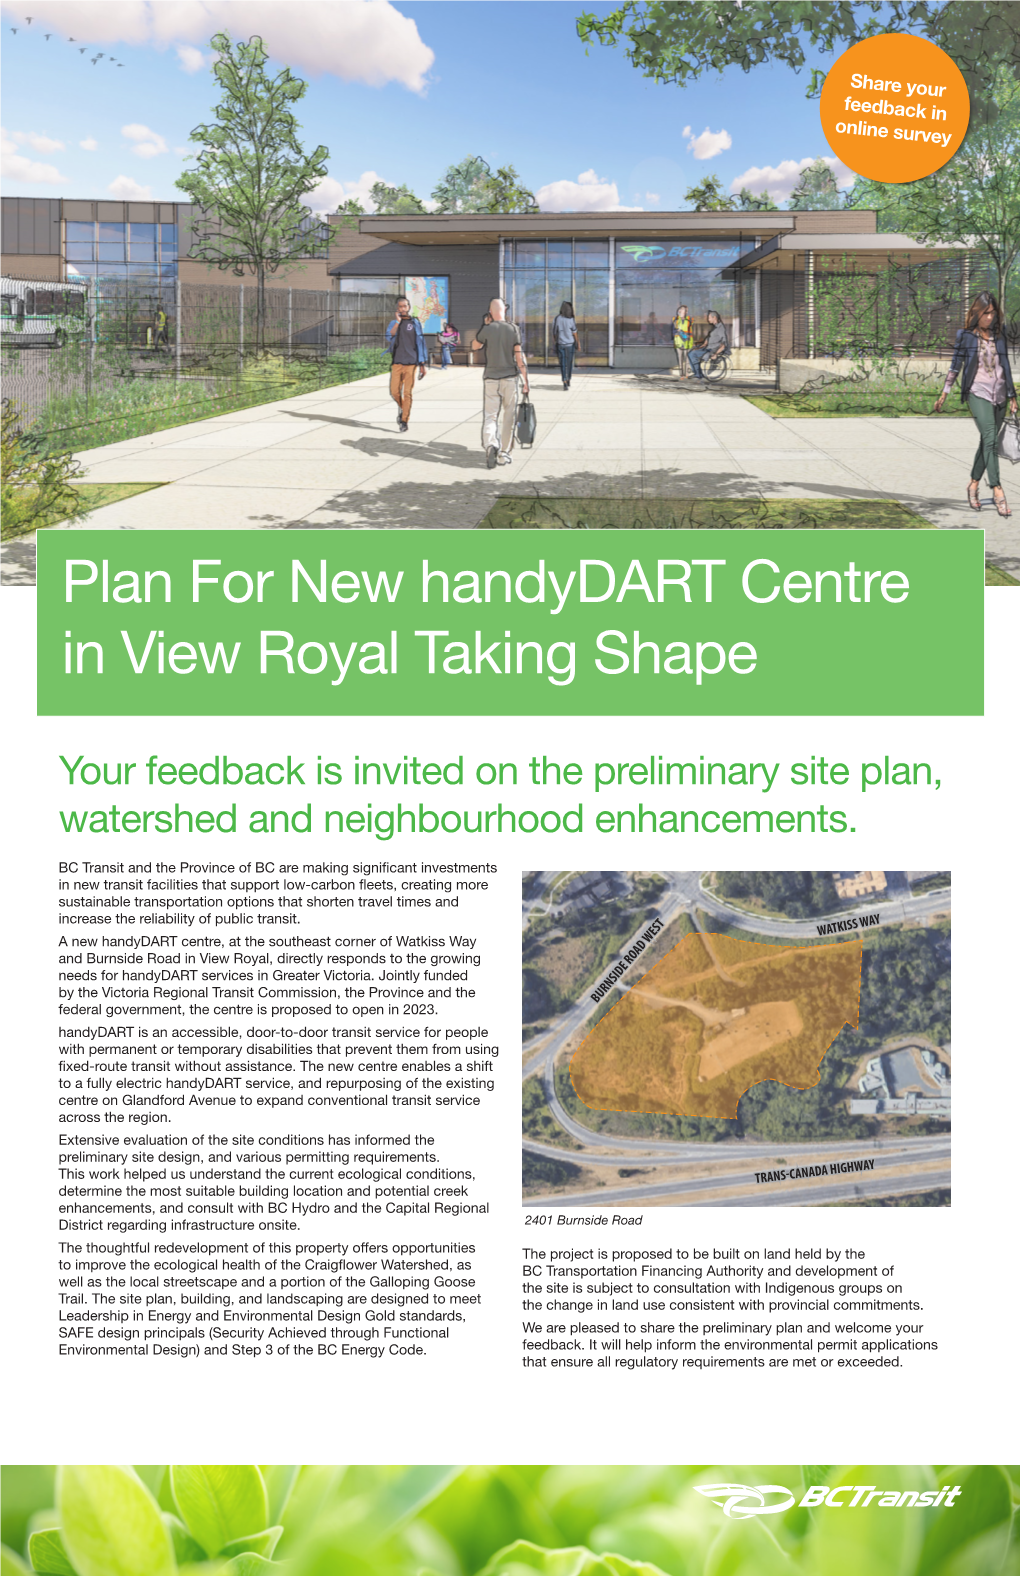 Plan for New Handydart Centre in View Royal Taking Shape